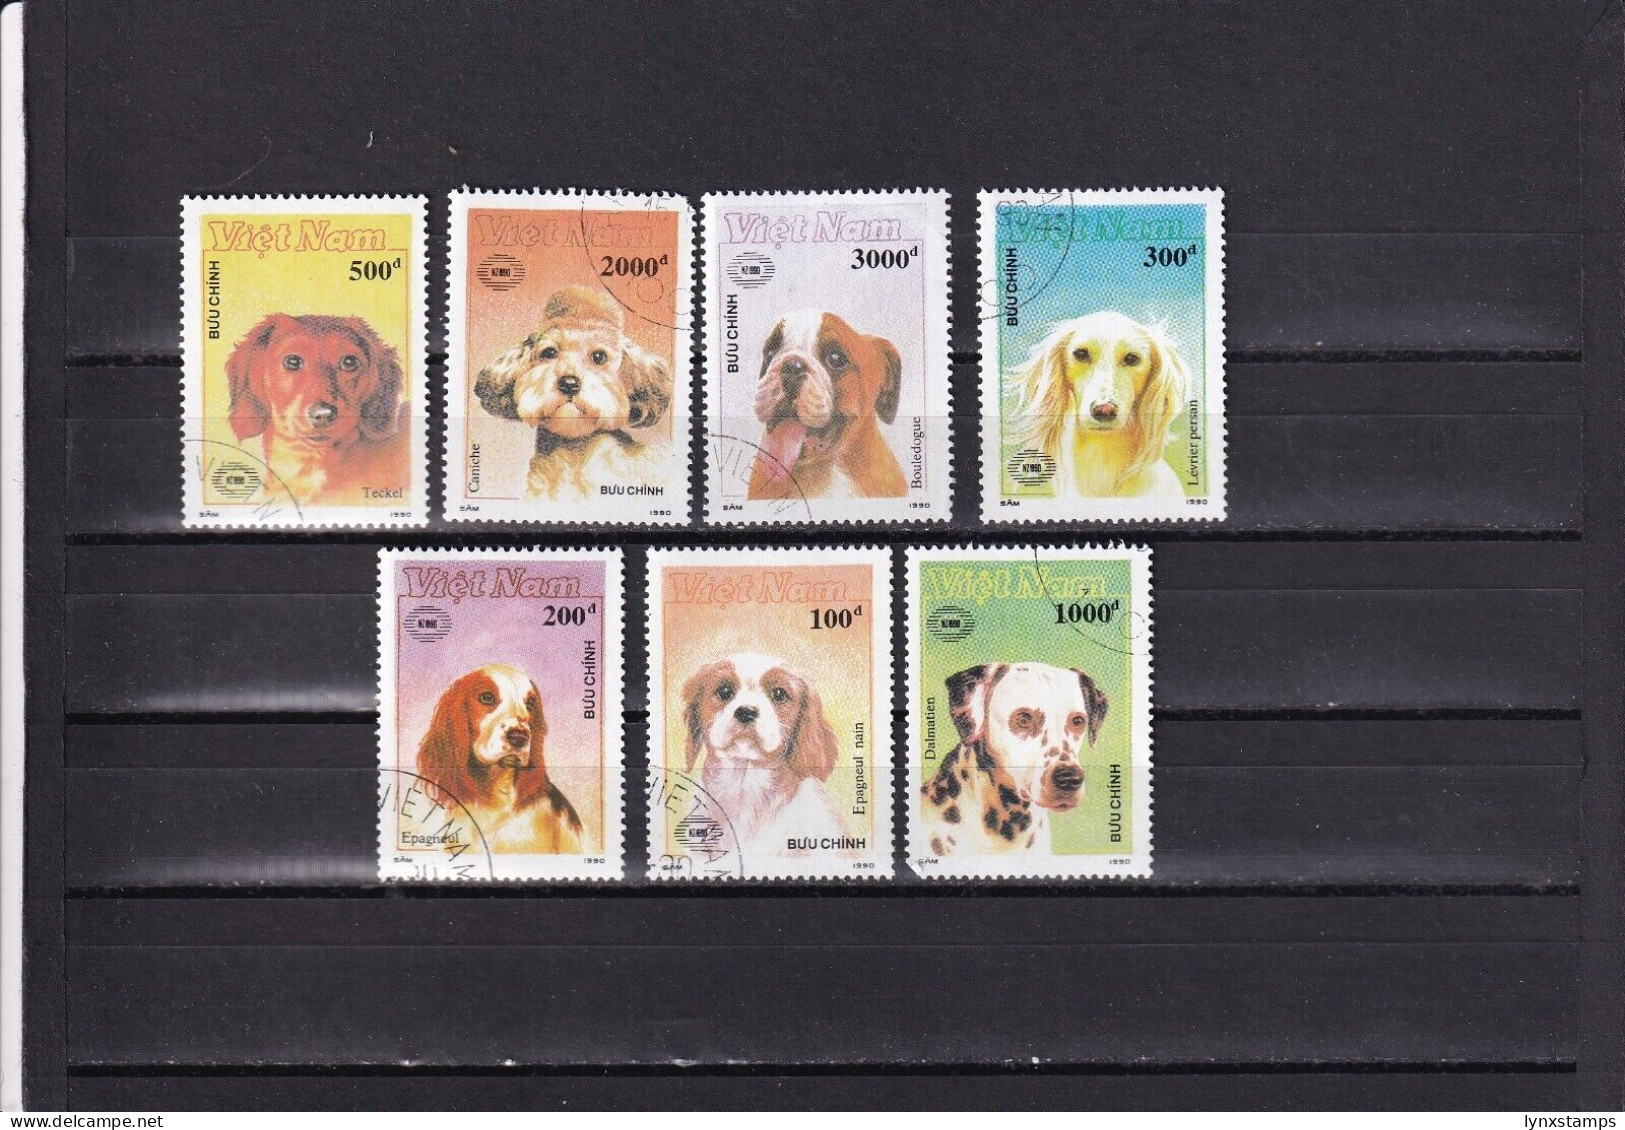 SA03 Vietnam 1990 International Stamp Exhibition New Zealand'90 Dogs Used Stamps - Dogs